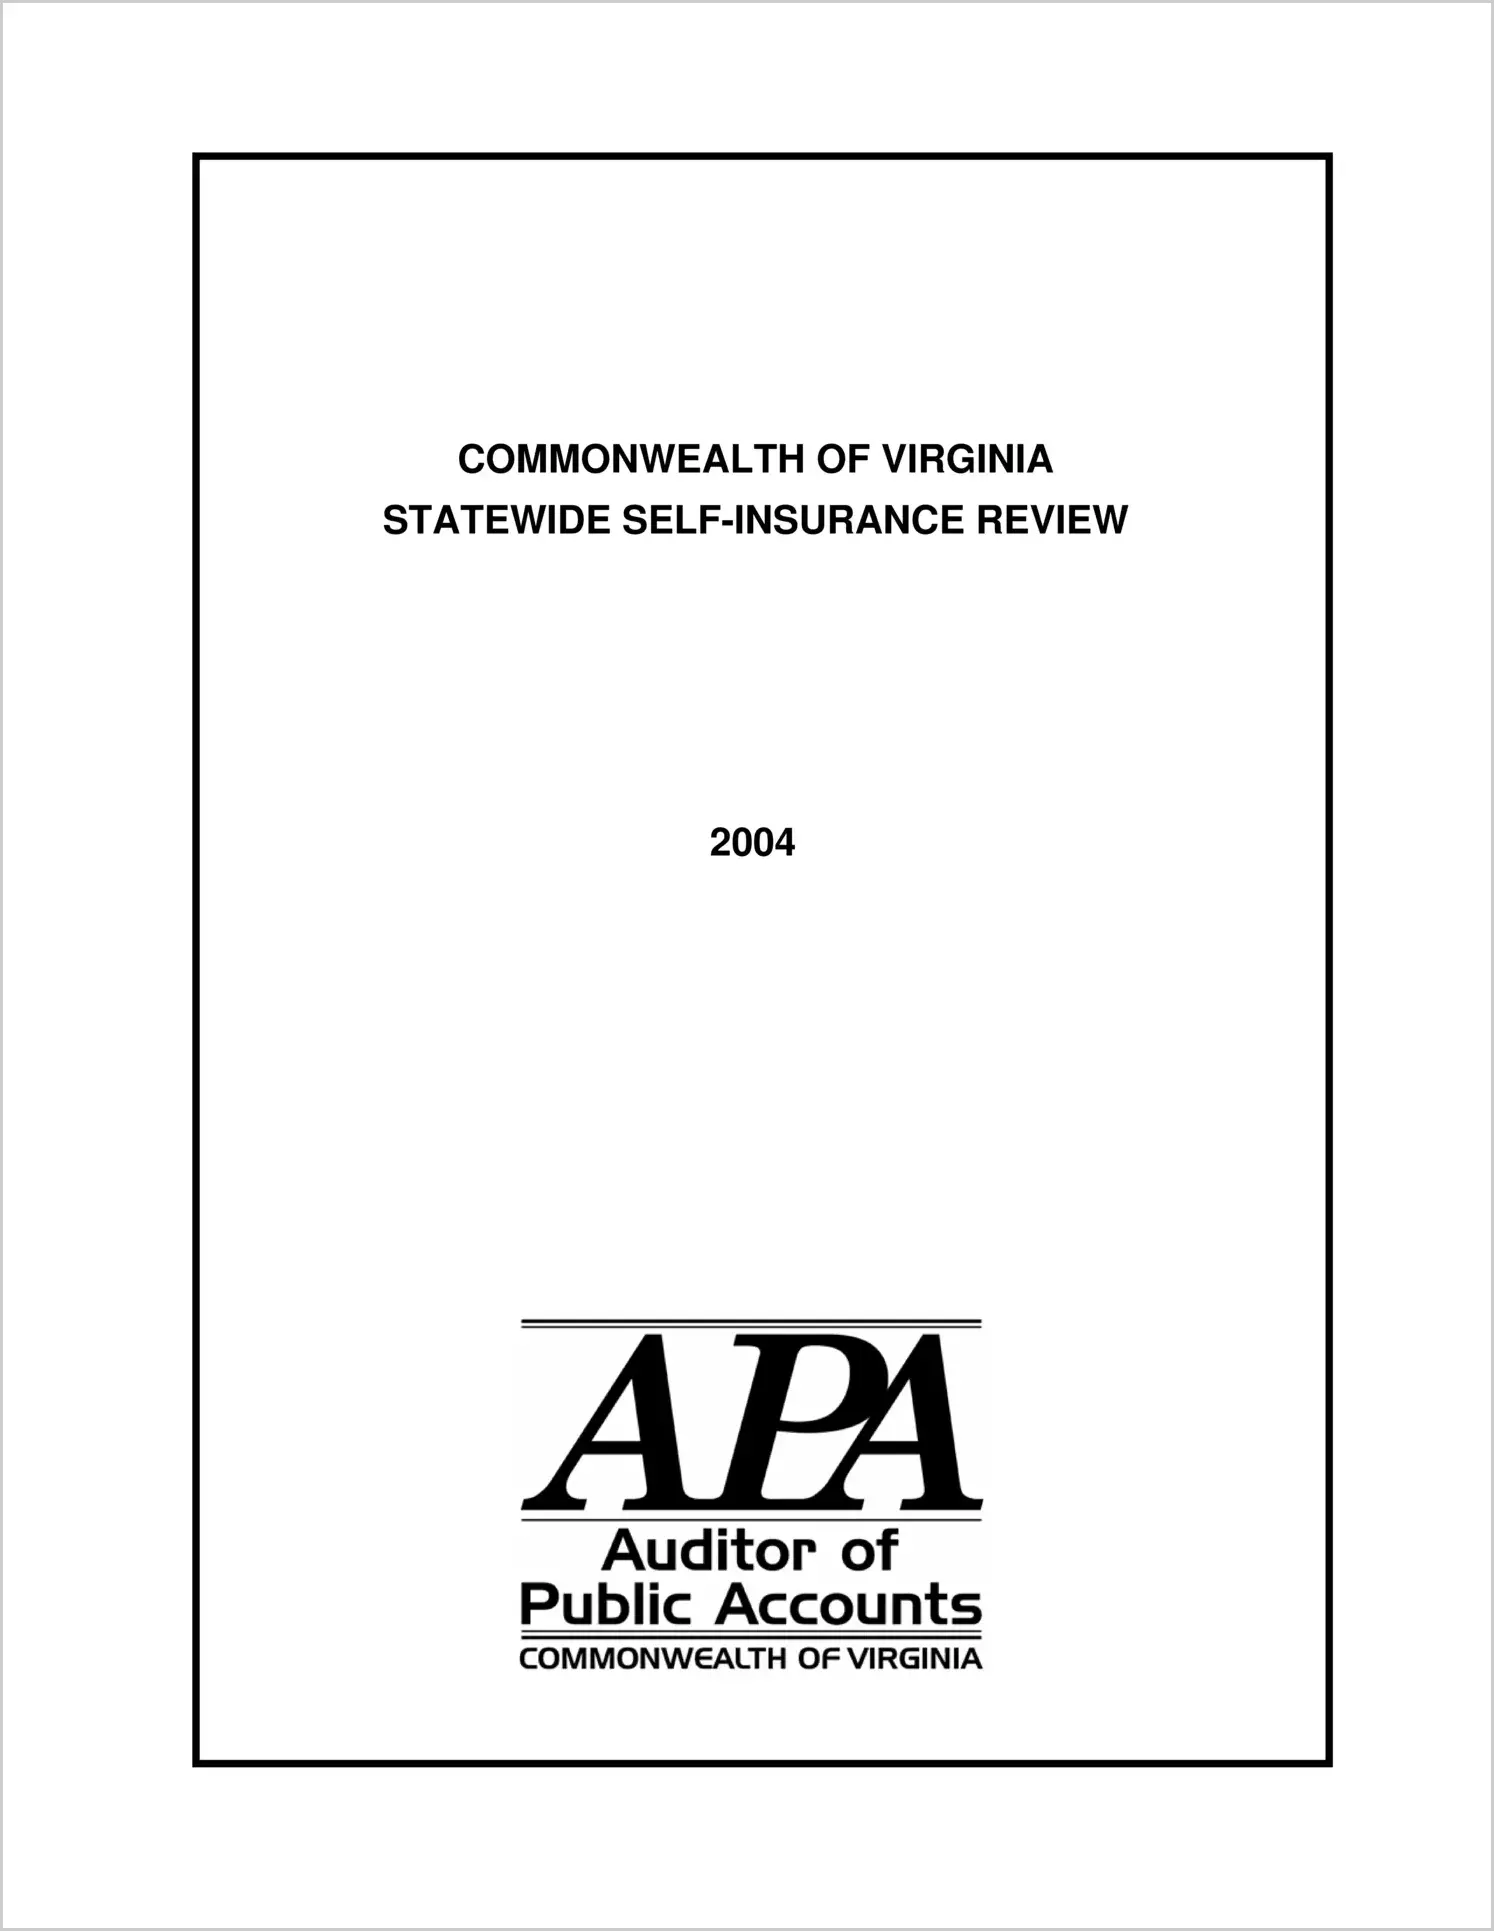 Commonwealth of Virginia Statewide Self-Insurance Review 2004